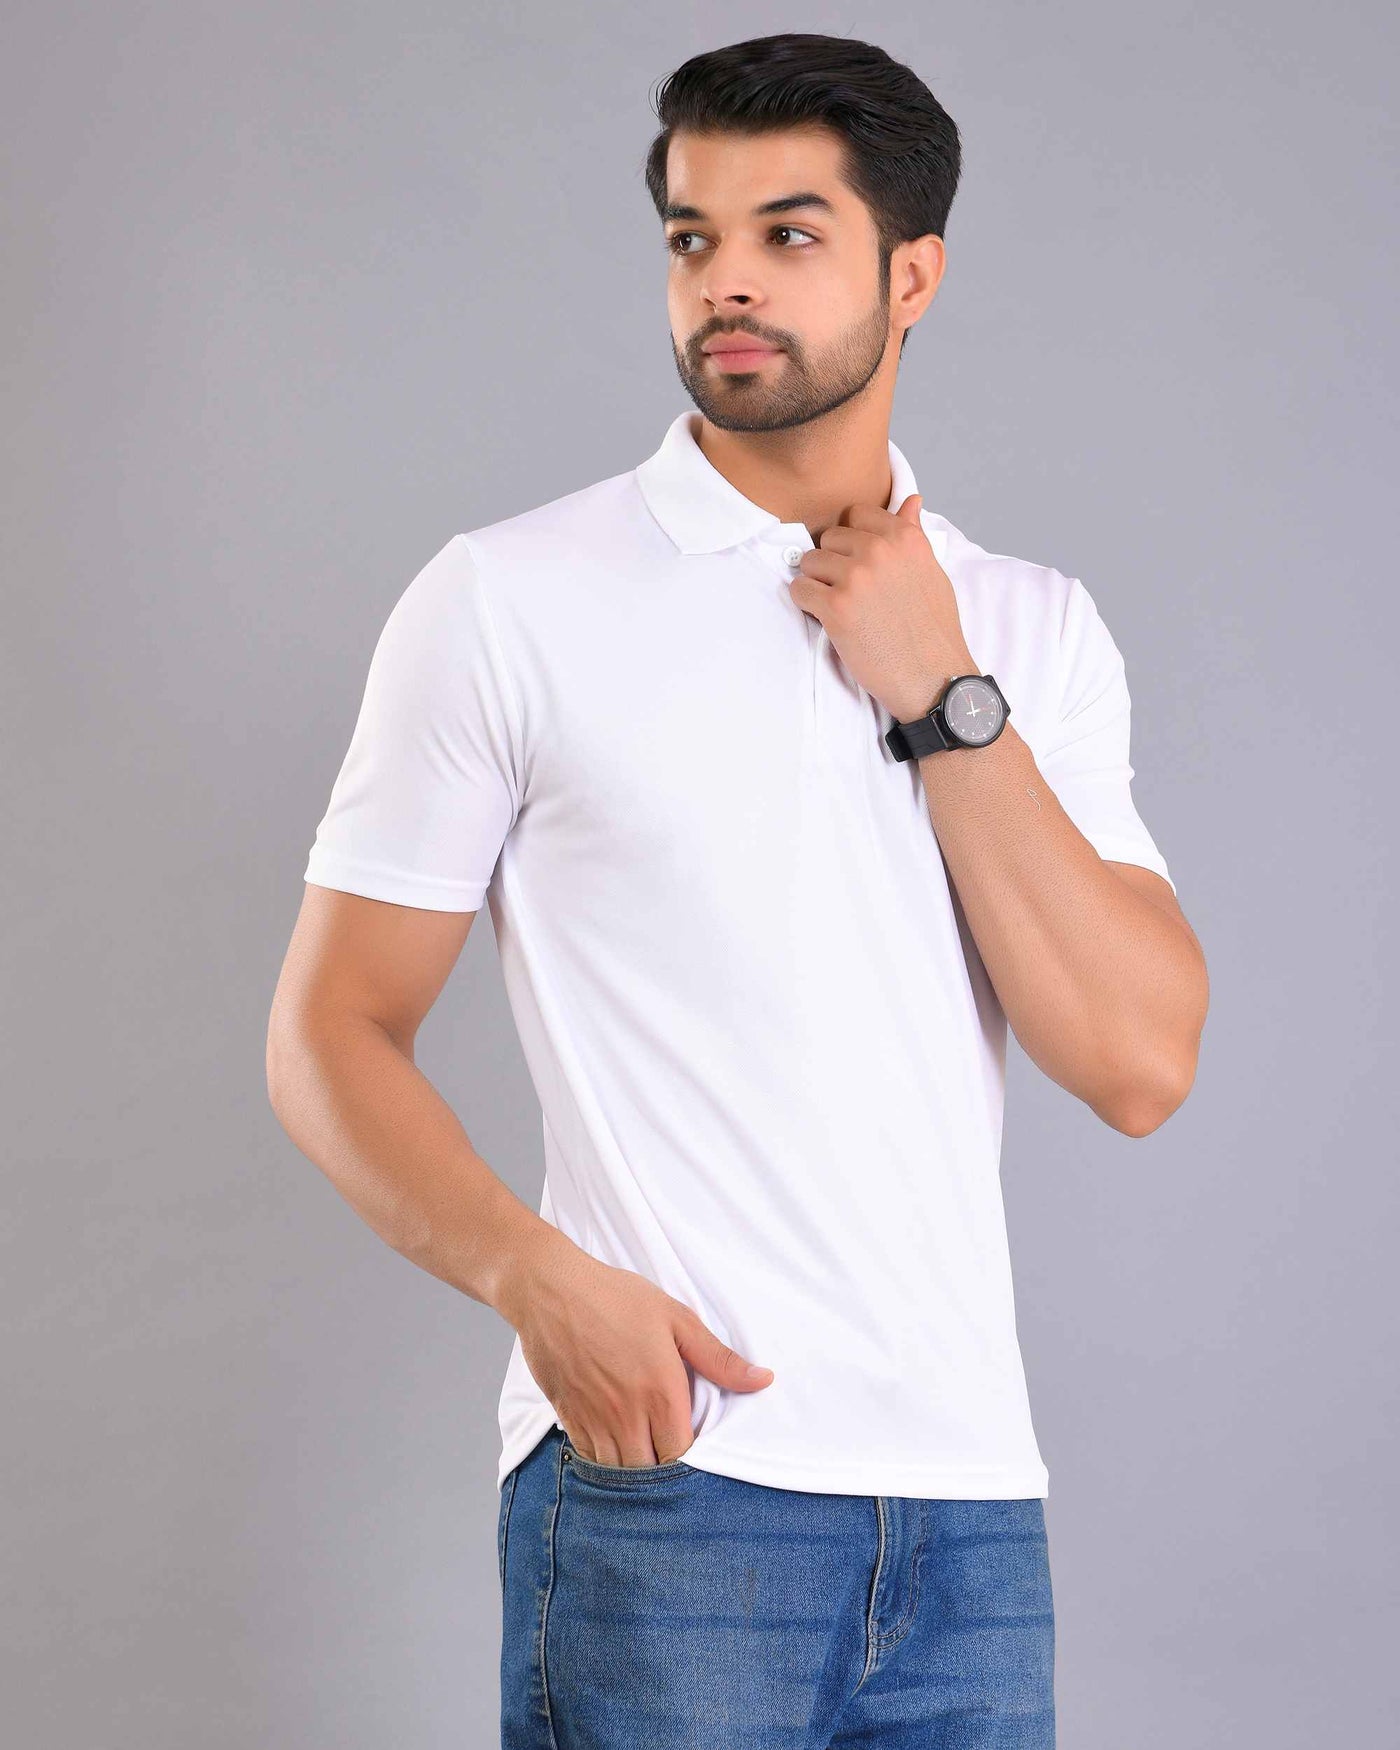 Dry Fit White Polo T-Shirt